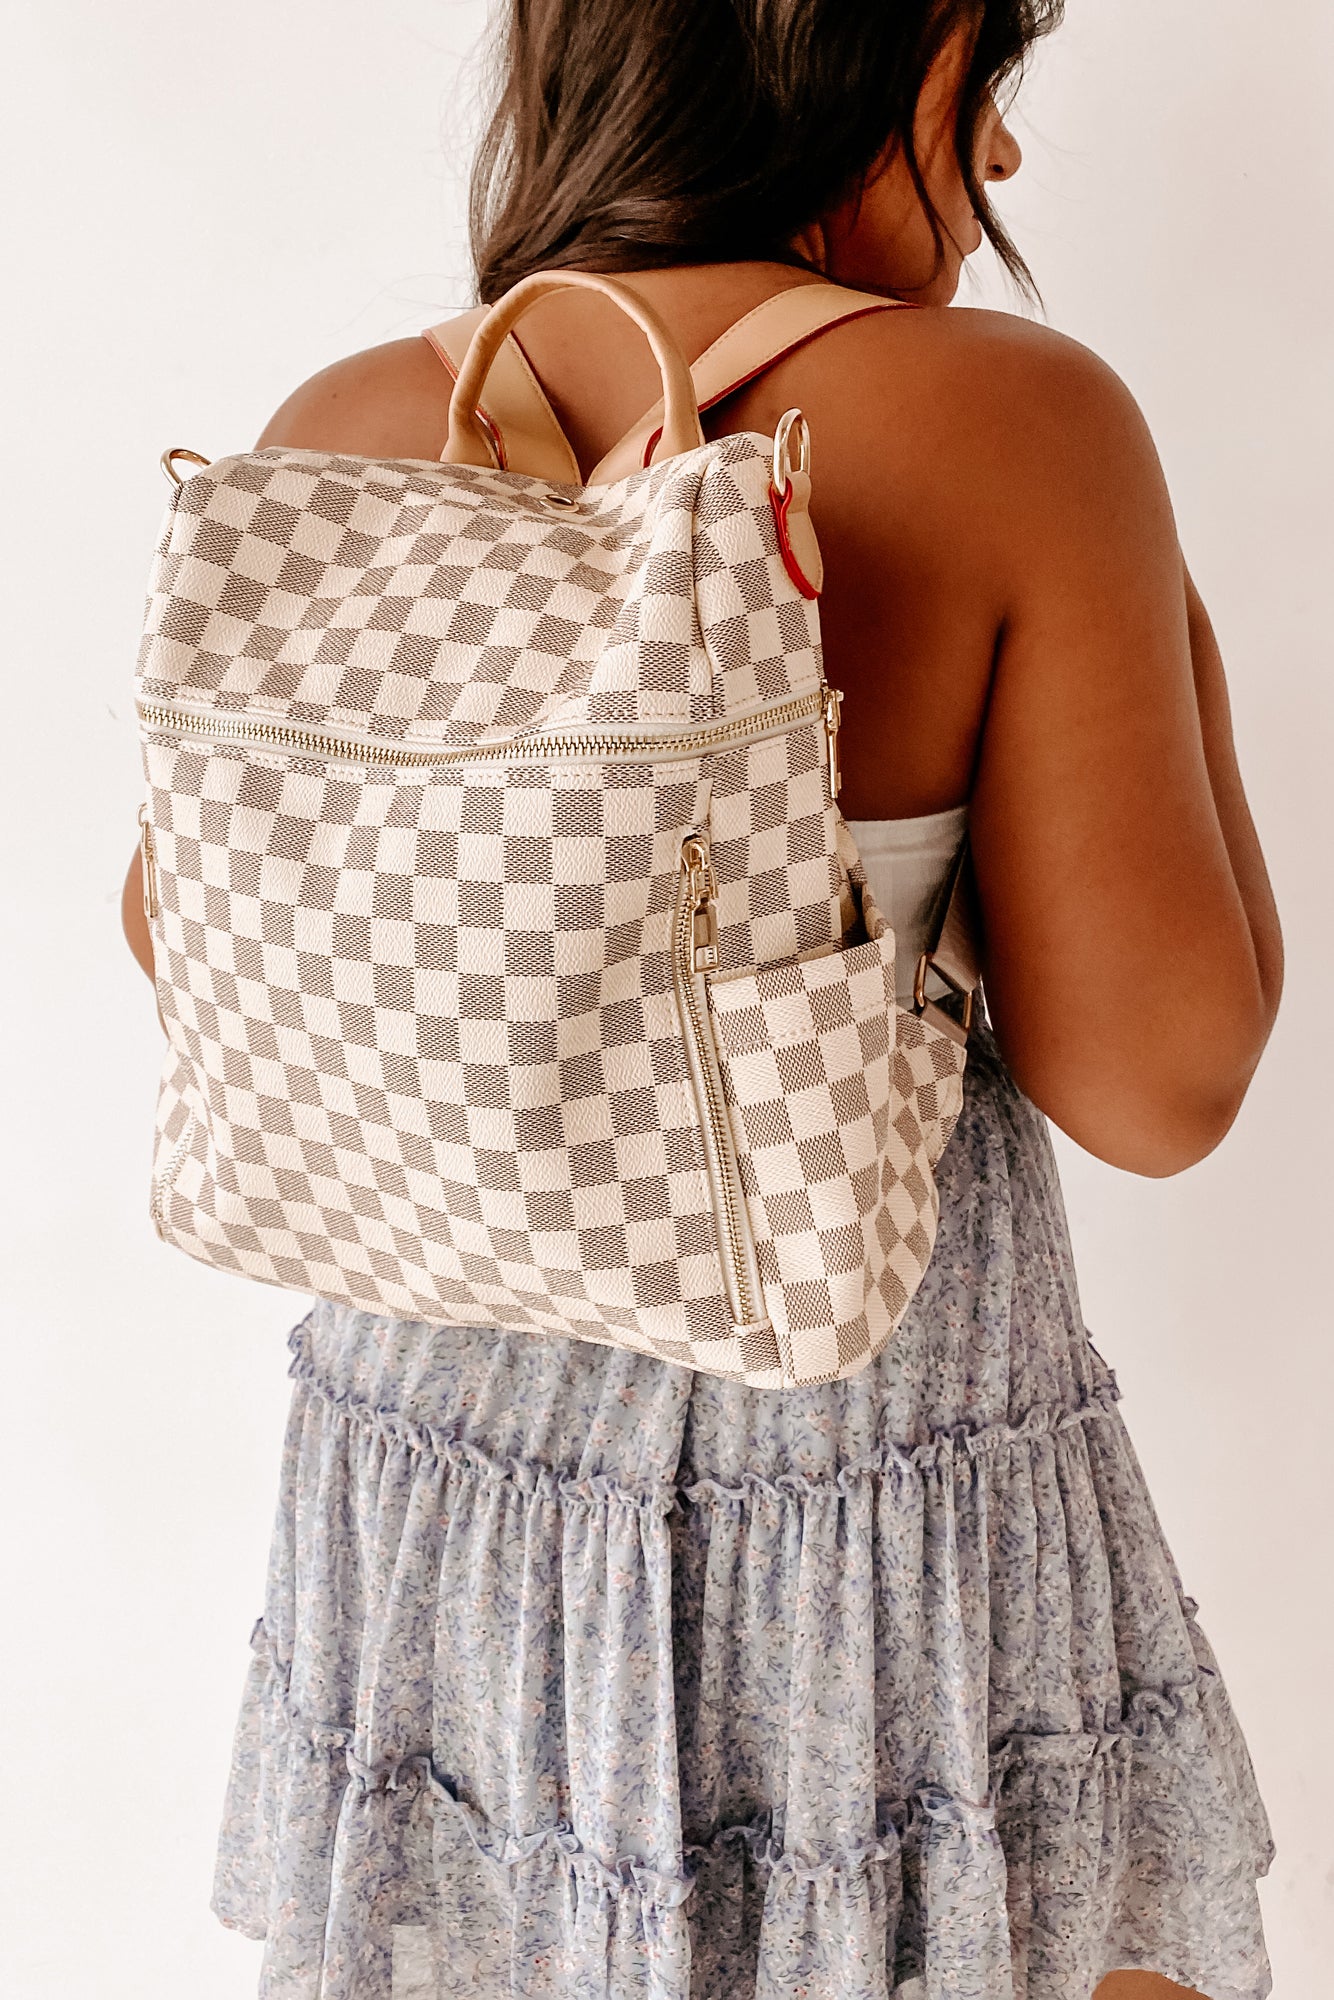 Glamfox - Cream Checker Backpack Colorful Strap Included